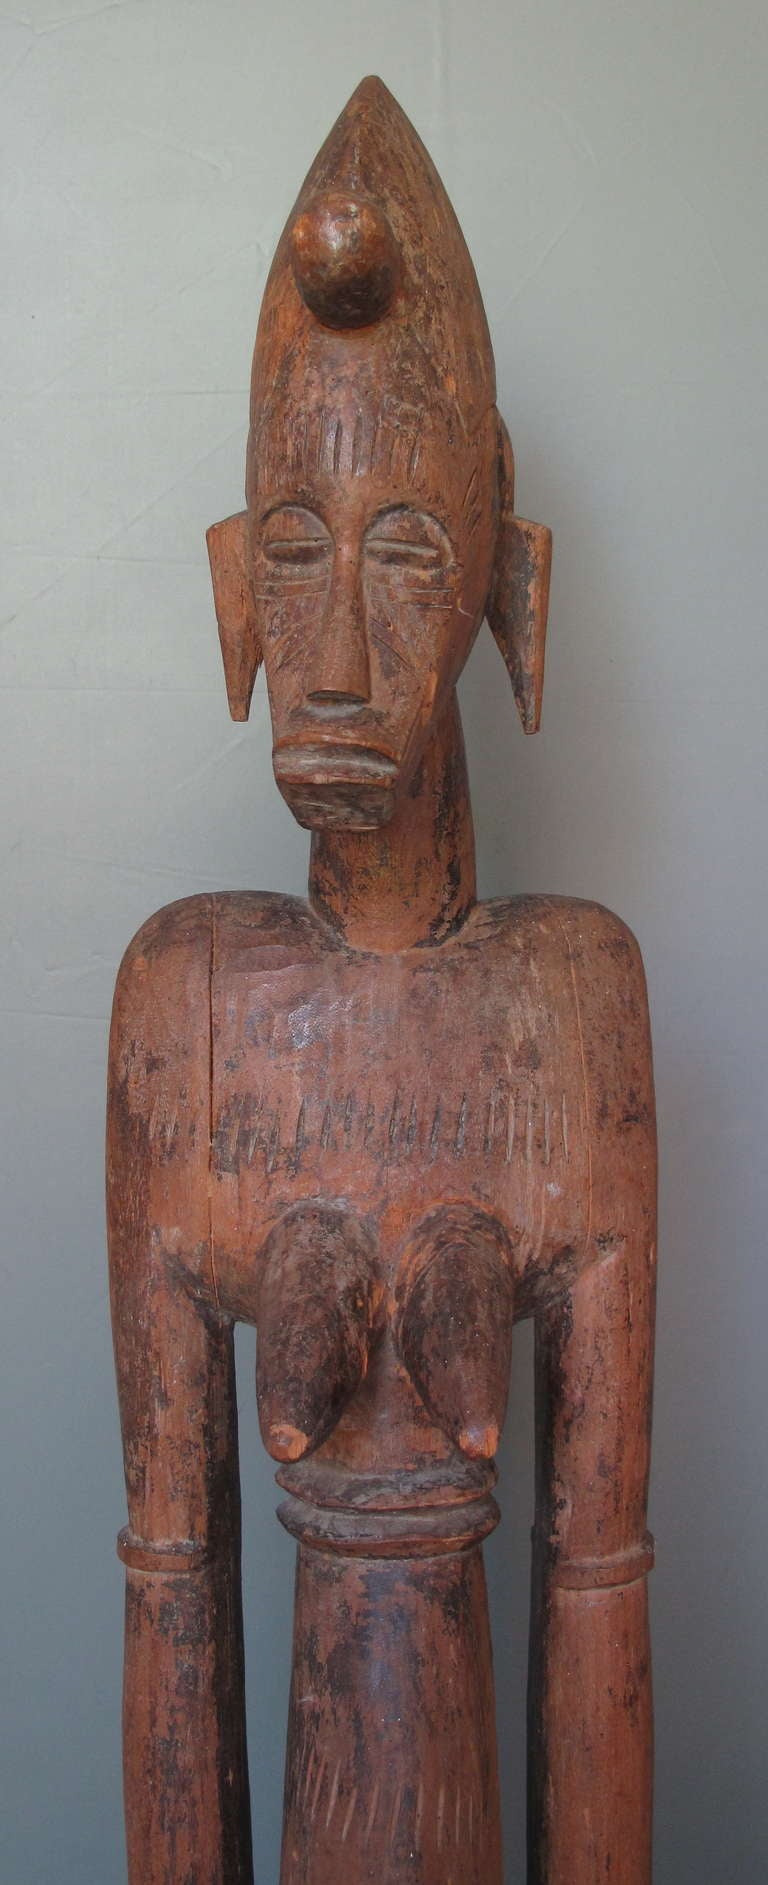 This female Senufo object, called deble, was used at Poro festivities, held by their upper arms and pounded on the ground to mark a rhythm for dancers.
The Senufo tribe spans several countries.